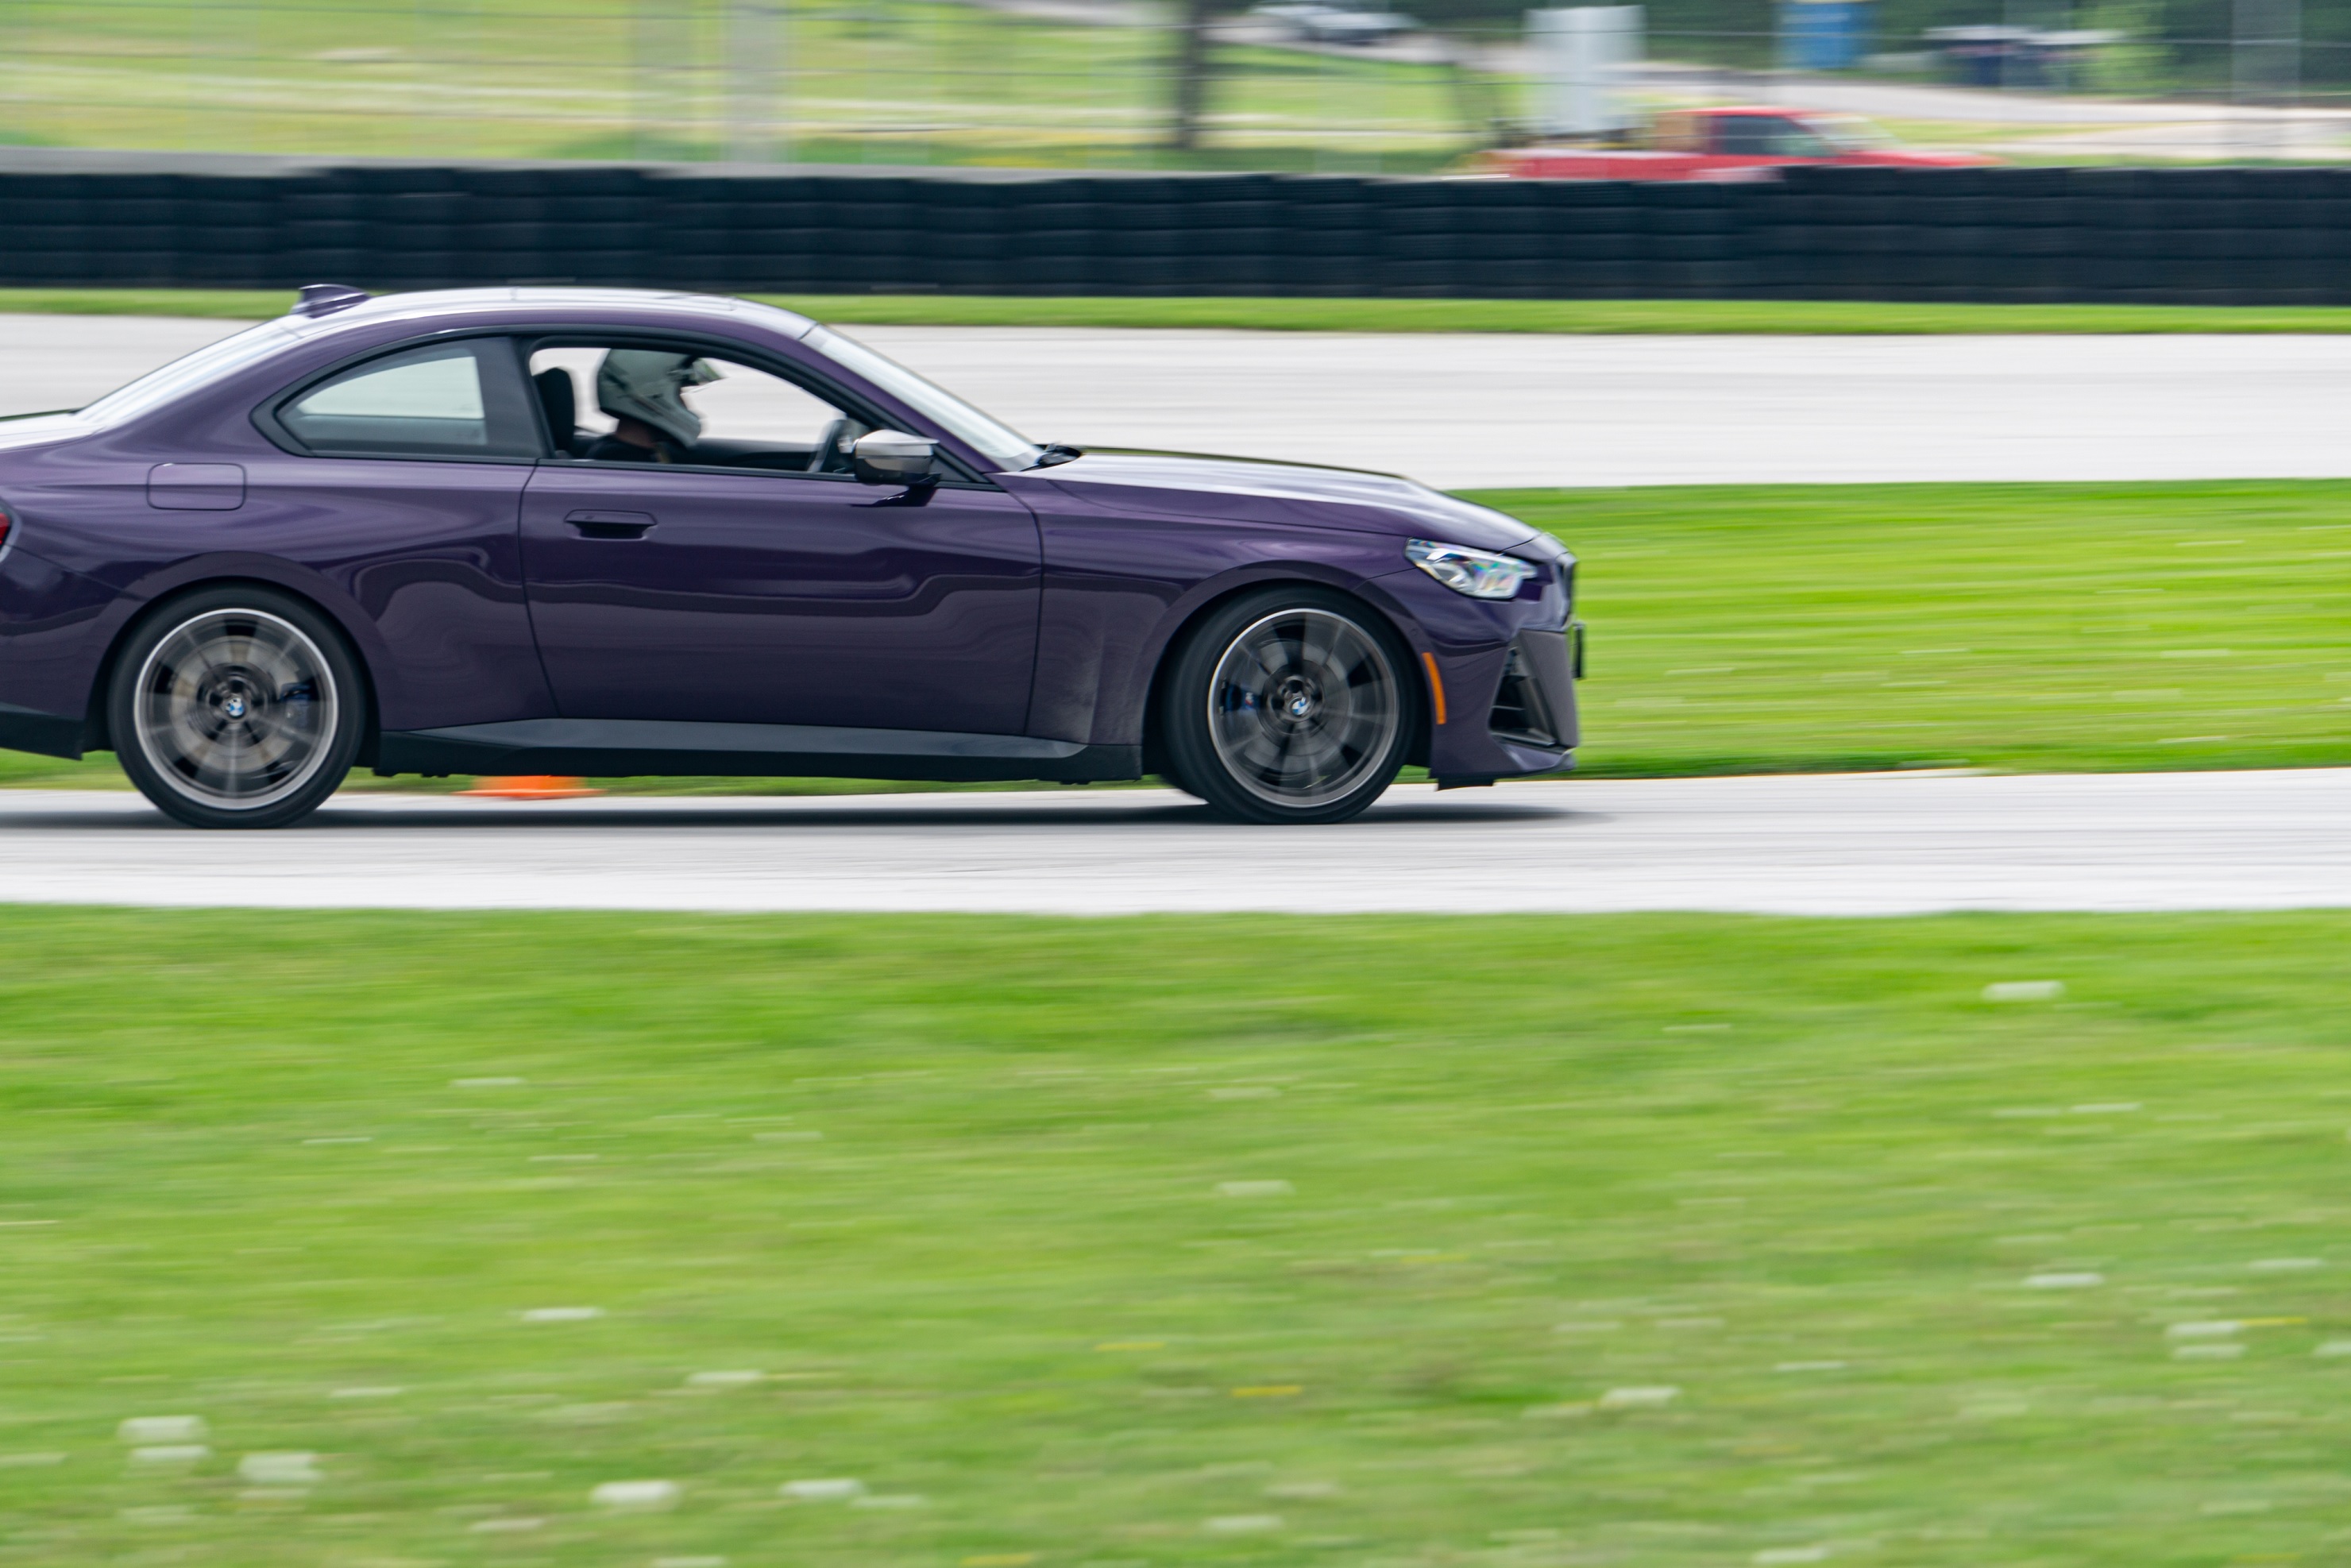 A close-up view of a purple 2022 BMW M240i xDrive Coupe racing around Road America's autocross course